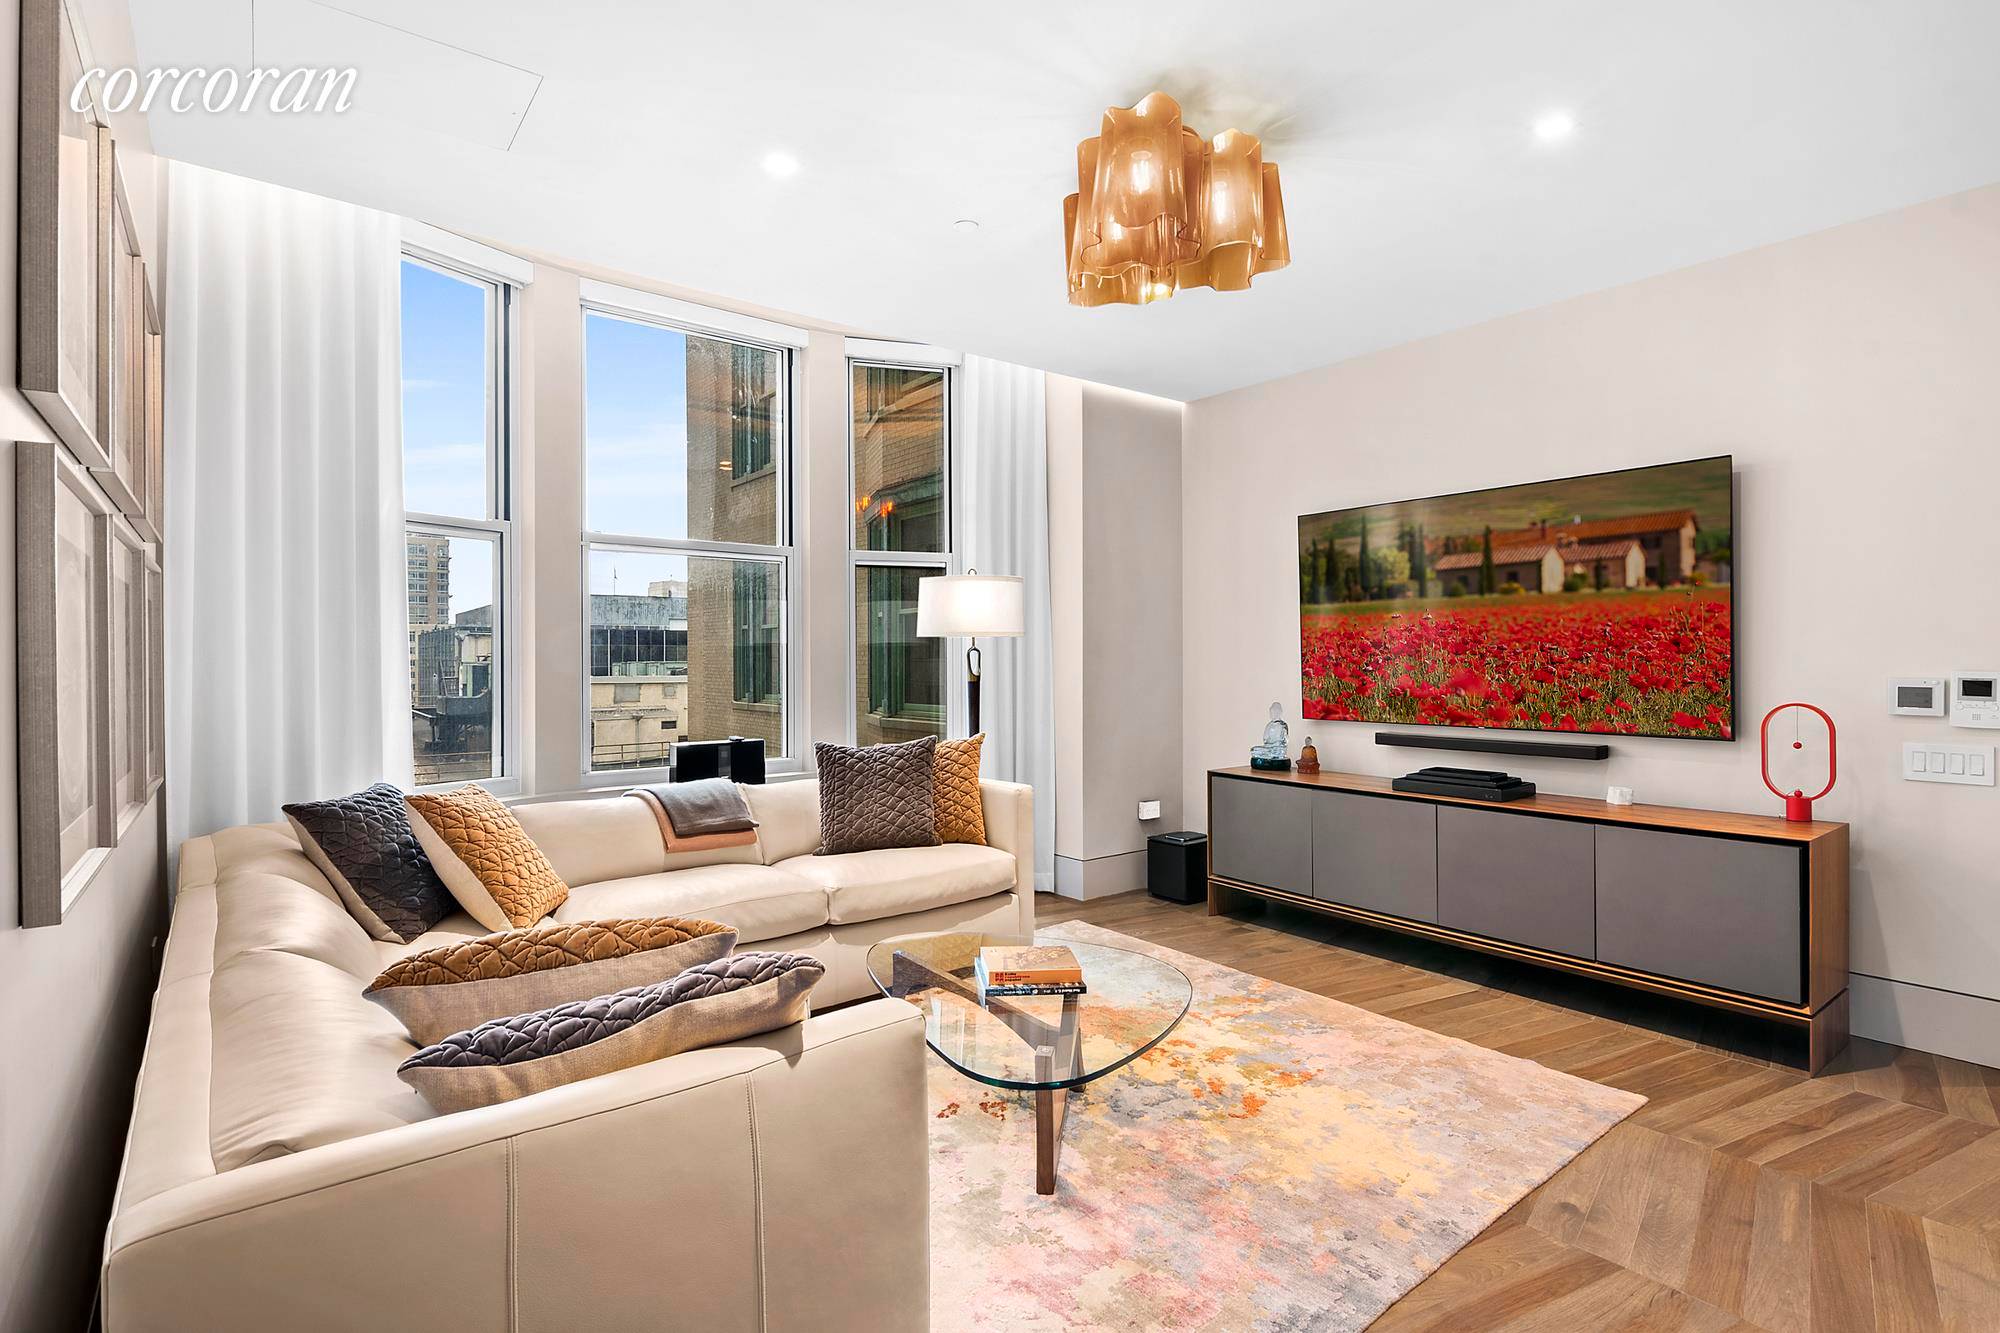 Welcome home to this oversized one bedroom, one and a half bath residence housed within one of Manhattan's finest Beaux Arts landmark buildings.